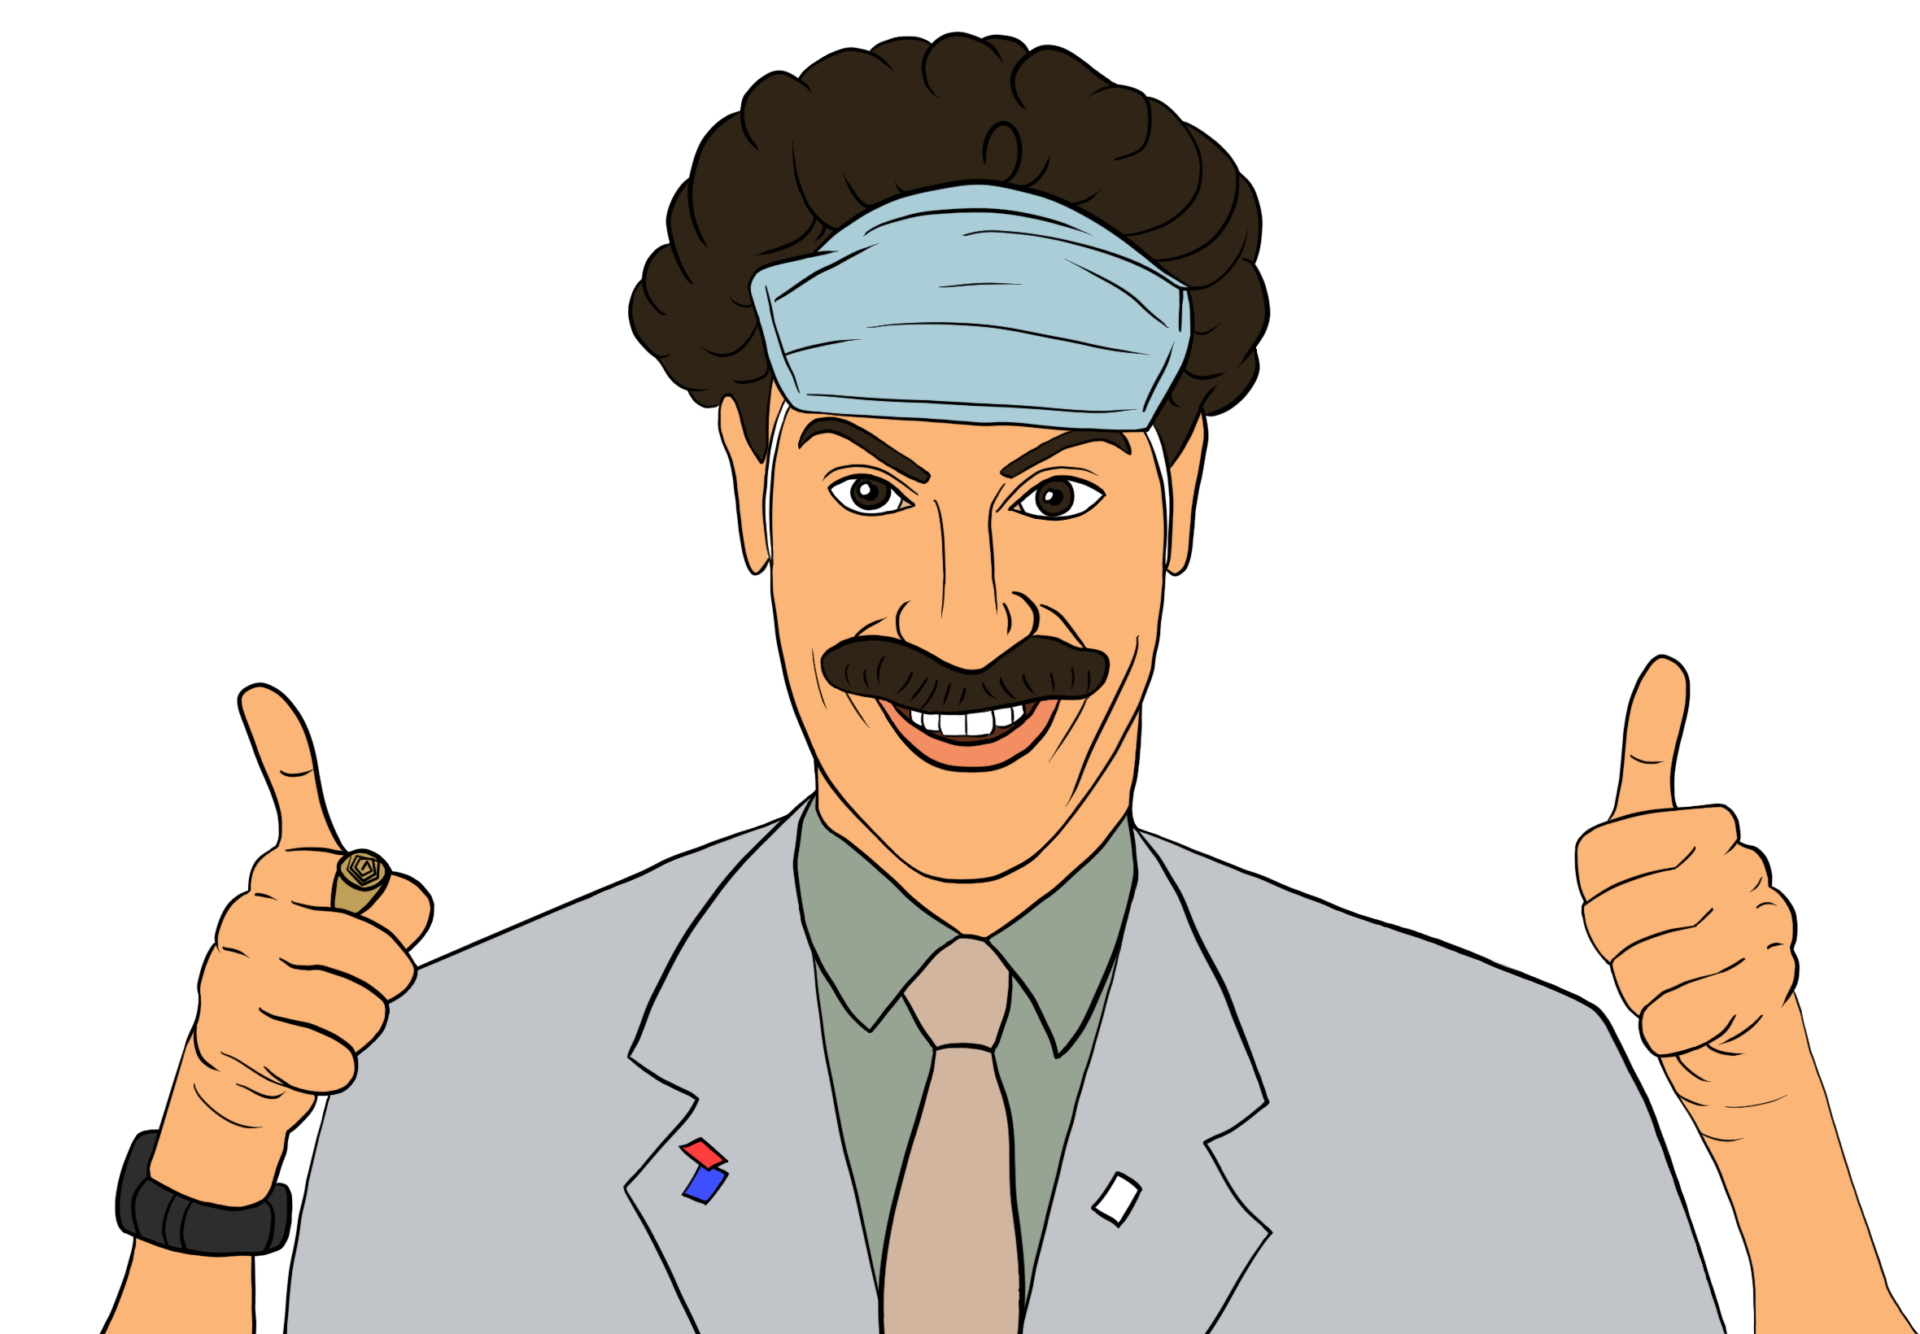 The character Borat grins and gives two thumbs up, wearing his face mask on his head.